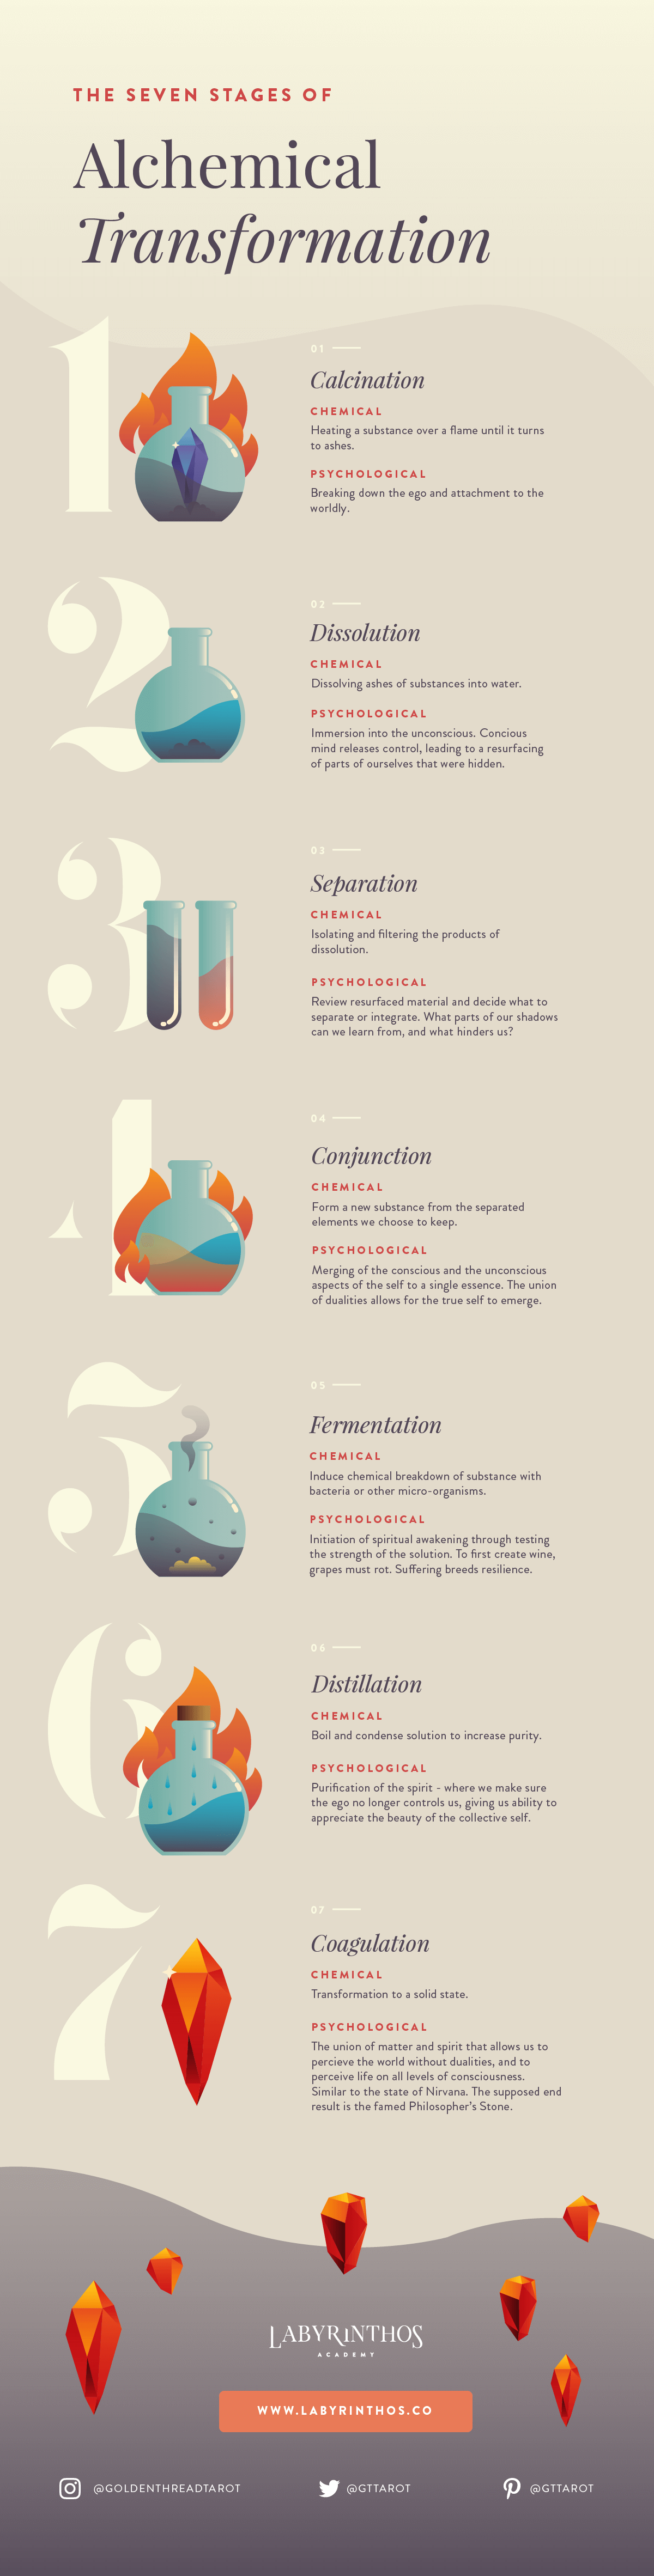 The Seven Stages of Alchemical Transformation - Alchemy Infographic, Spiritual Lesson, Spiritual Infographic, Occult Infographic, Witchcraft Infographic